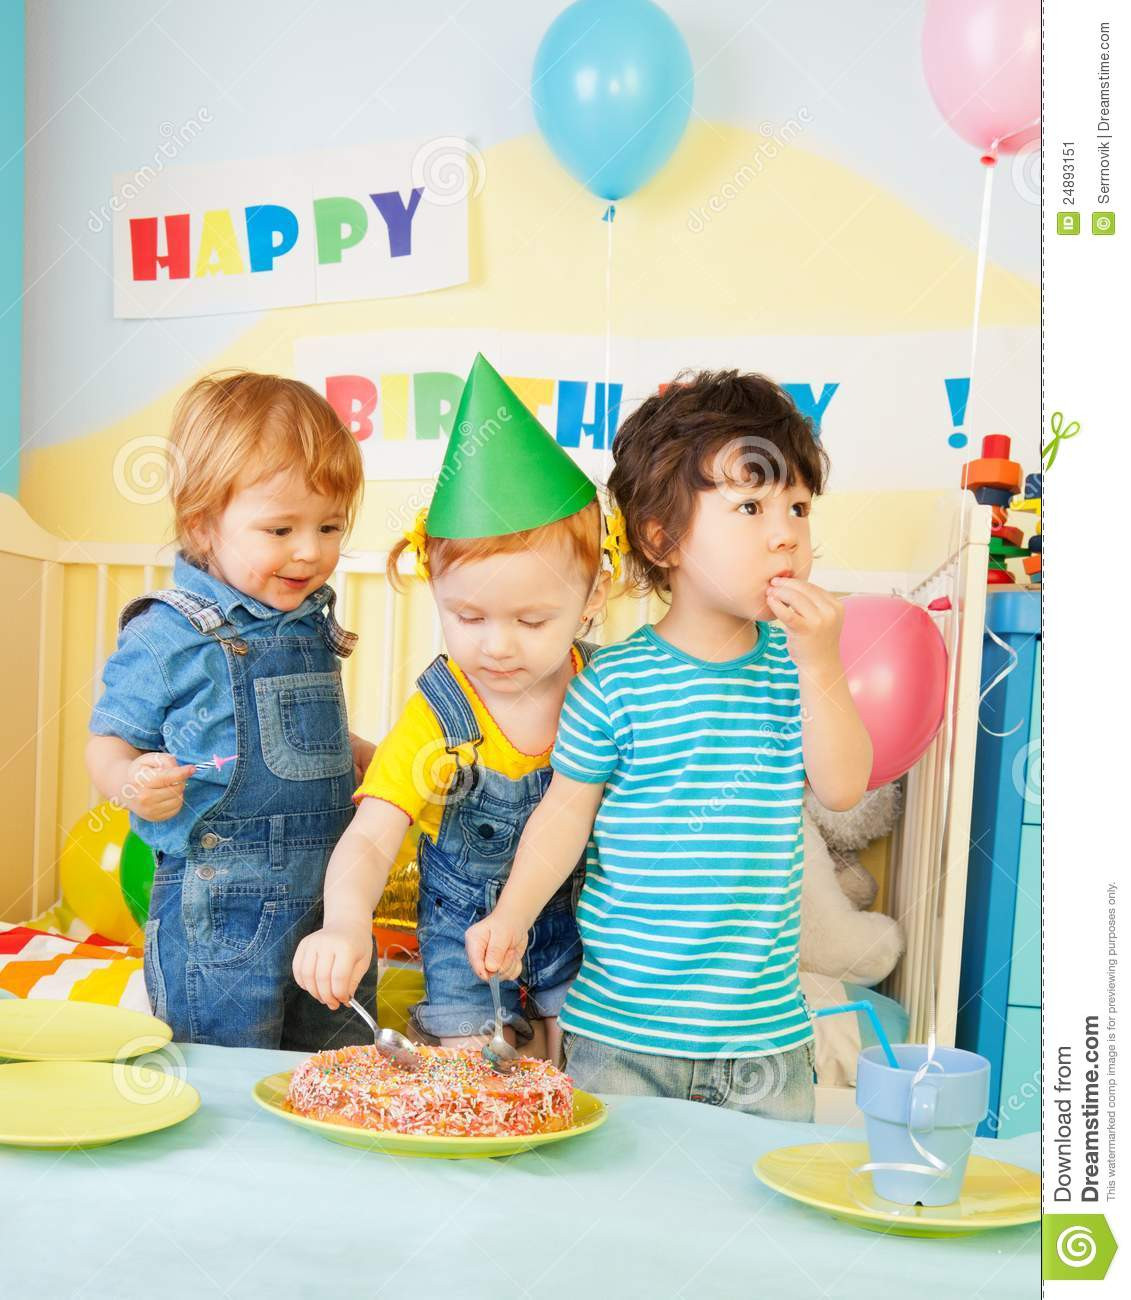 What To Serve At A Kids Birthday Party
 Three Kids Eating Cake The Birthday Party Stock Image